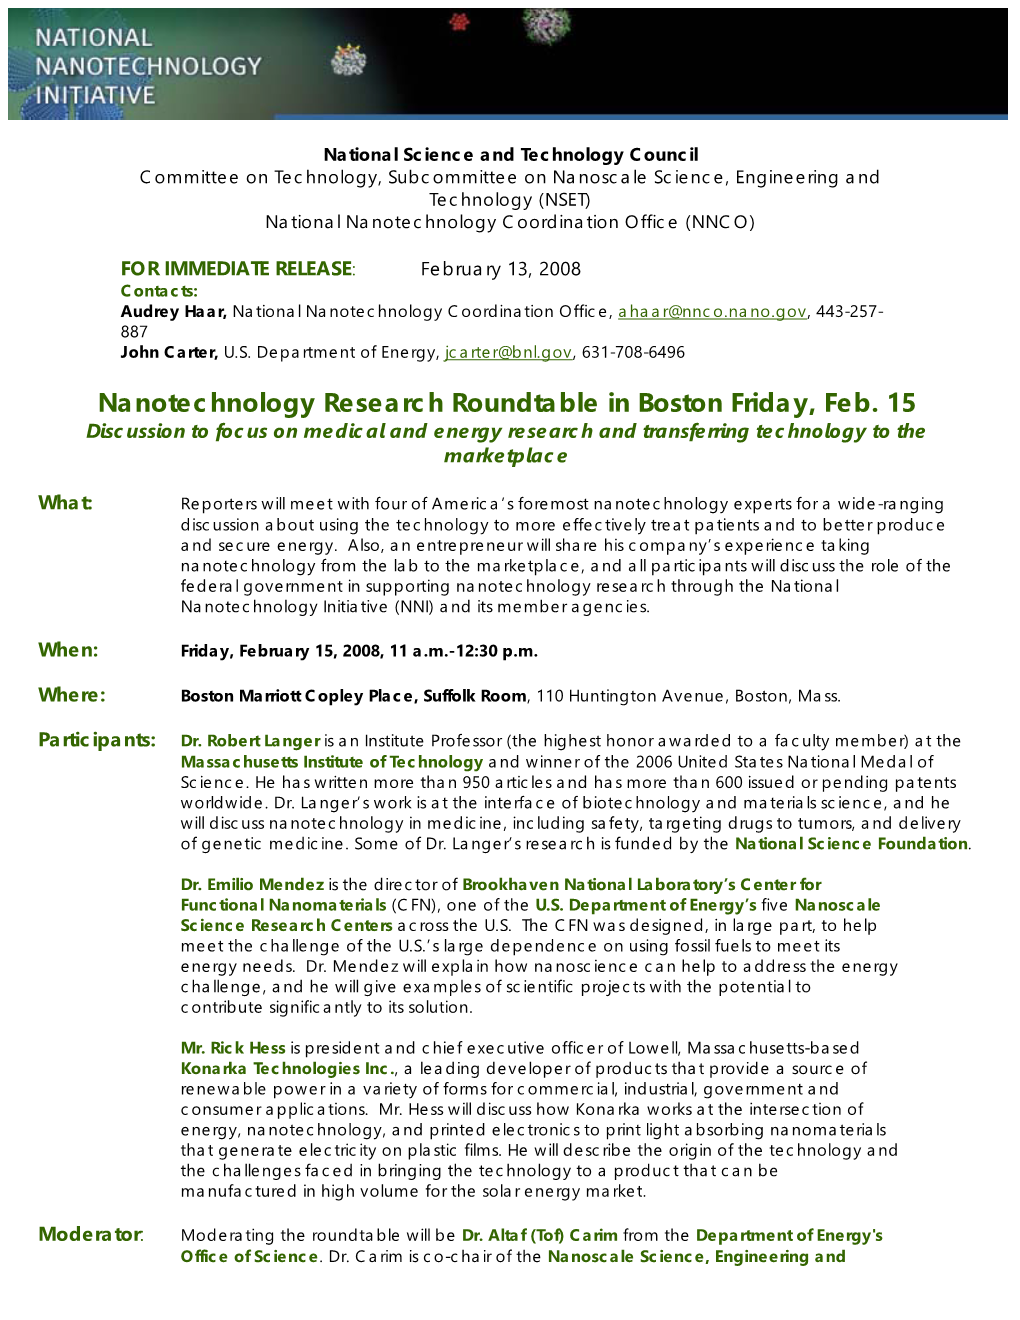 Nanotechnology Research Roundtable in Boston Friday, Feb. 15 Discussion to Focus on Medical and Energy Research and Transferring Technology to the Marketplace